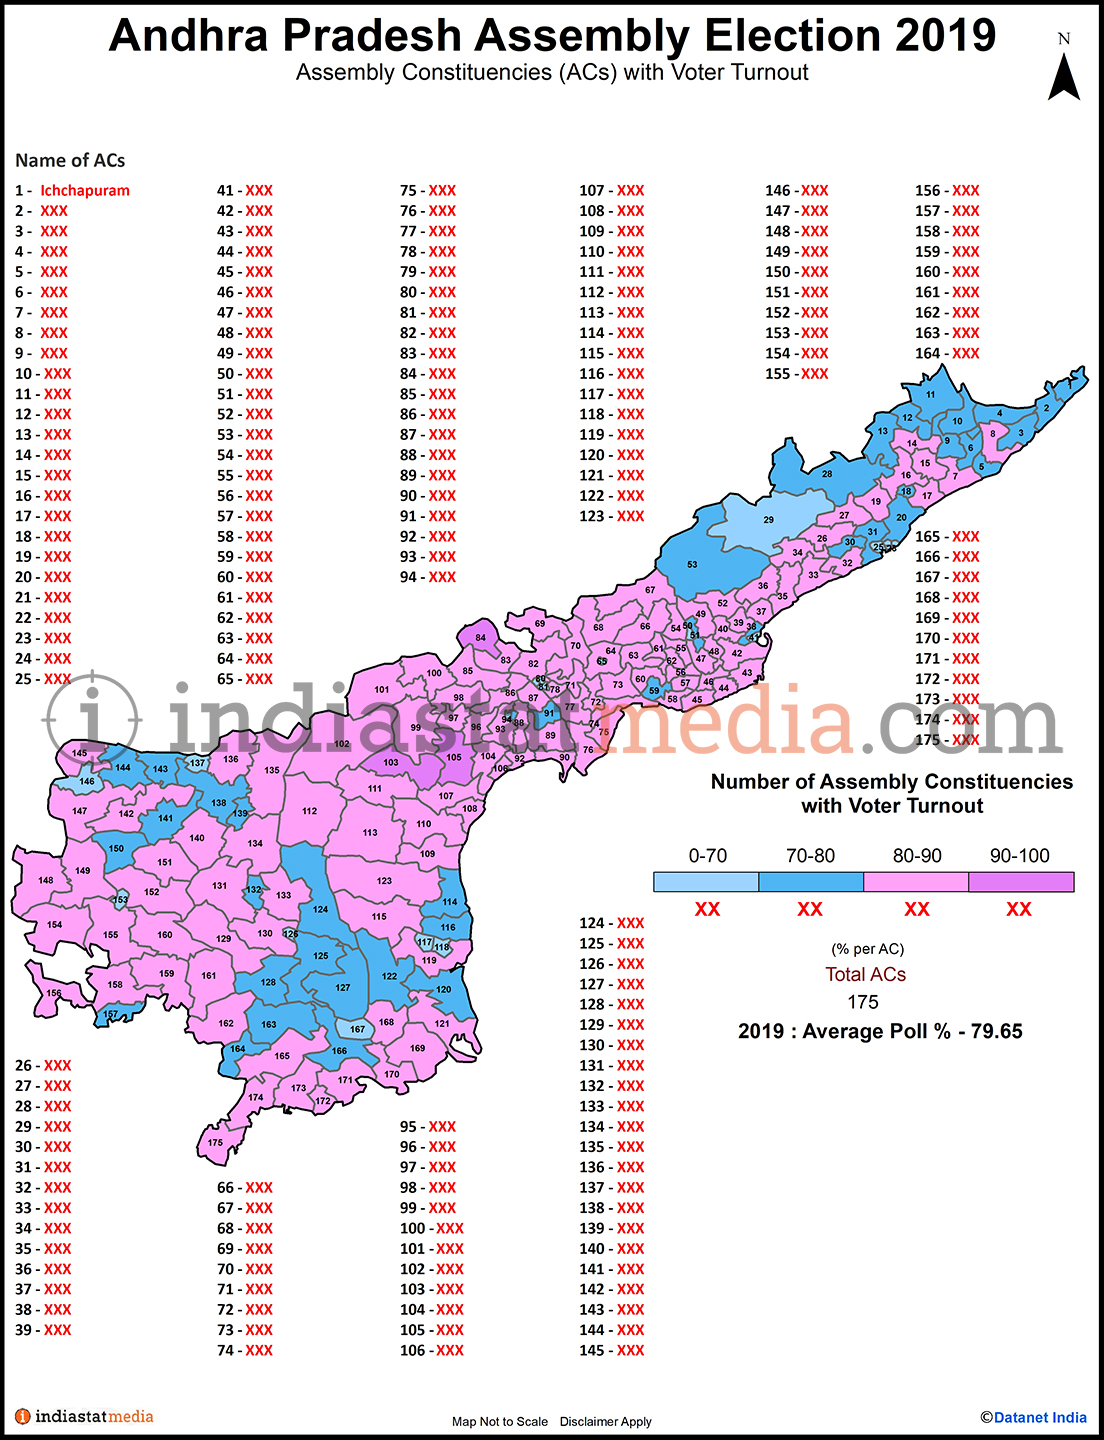 Assembly Constituencies (ACs) with Voter Turnout in Andhra Pradesh (Assembly Election - 2019)